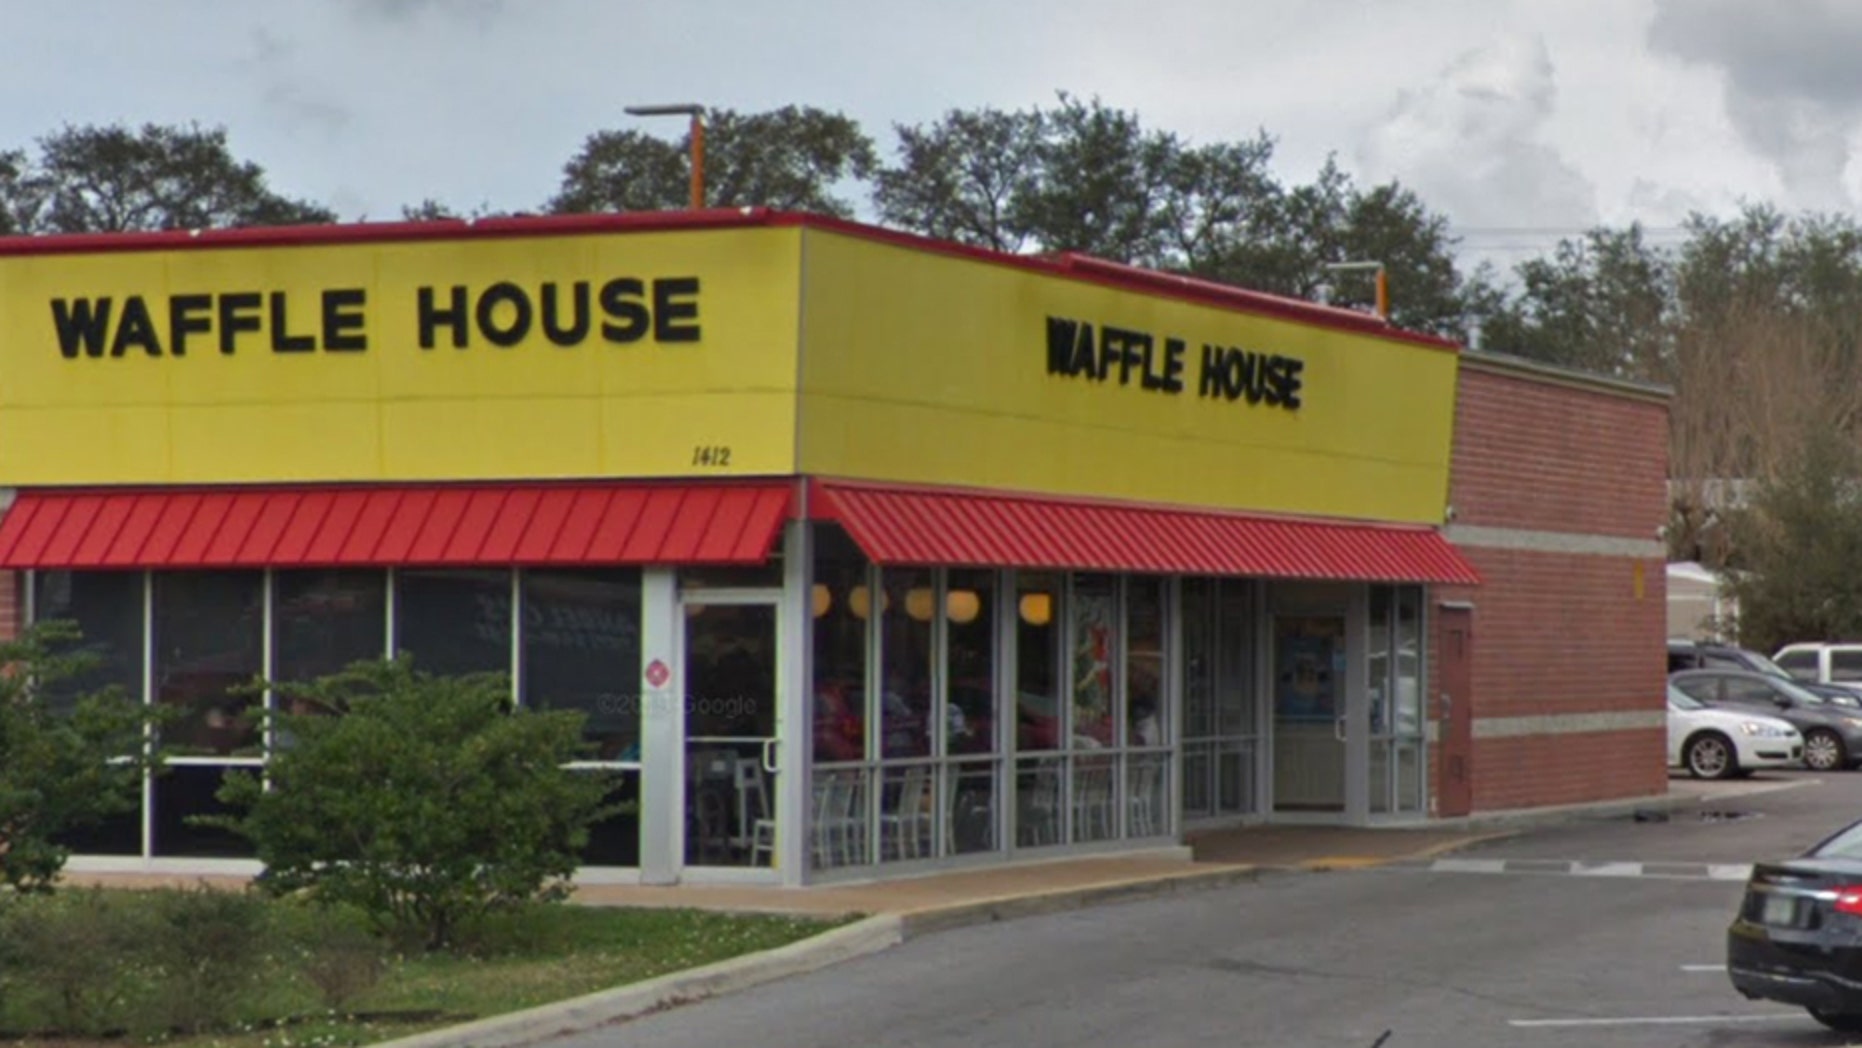 The waffle house where the accident occurred.